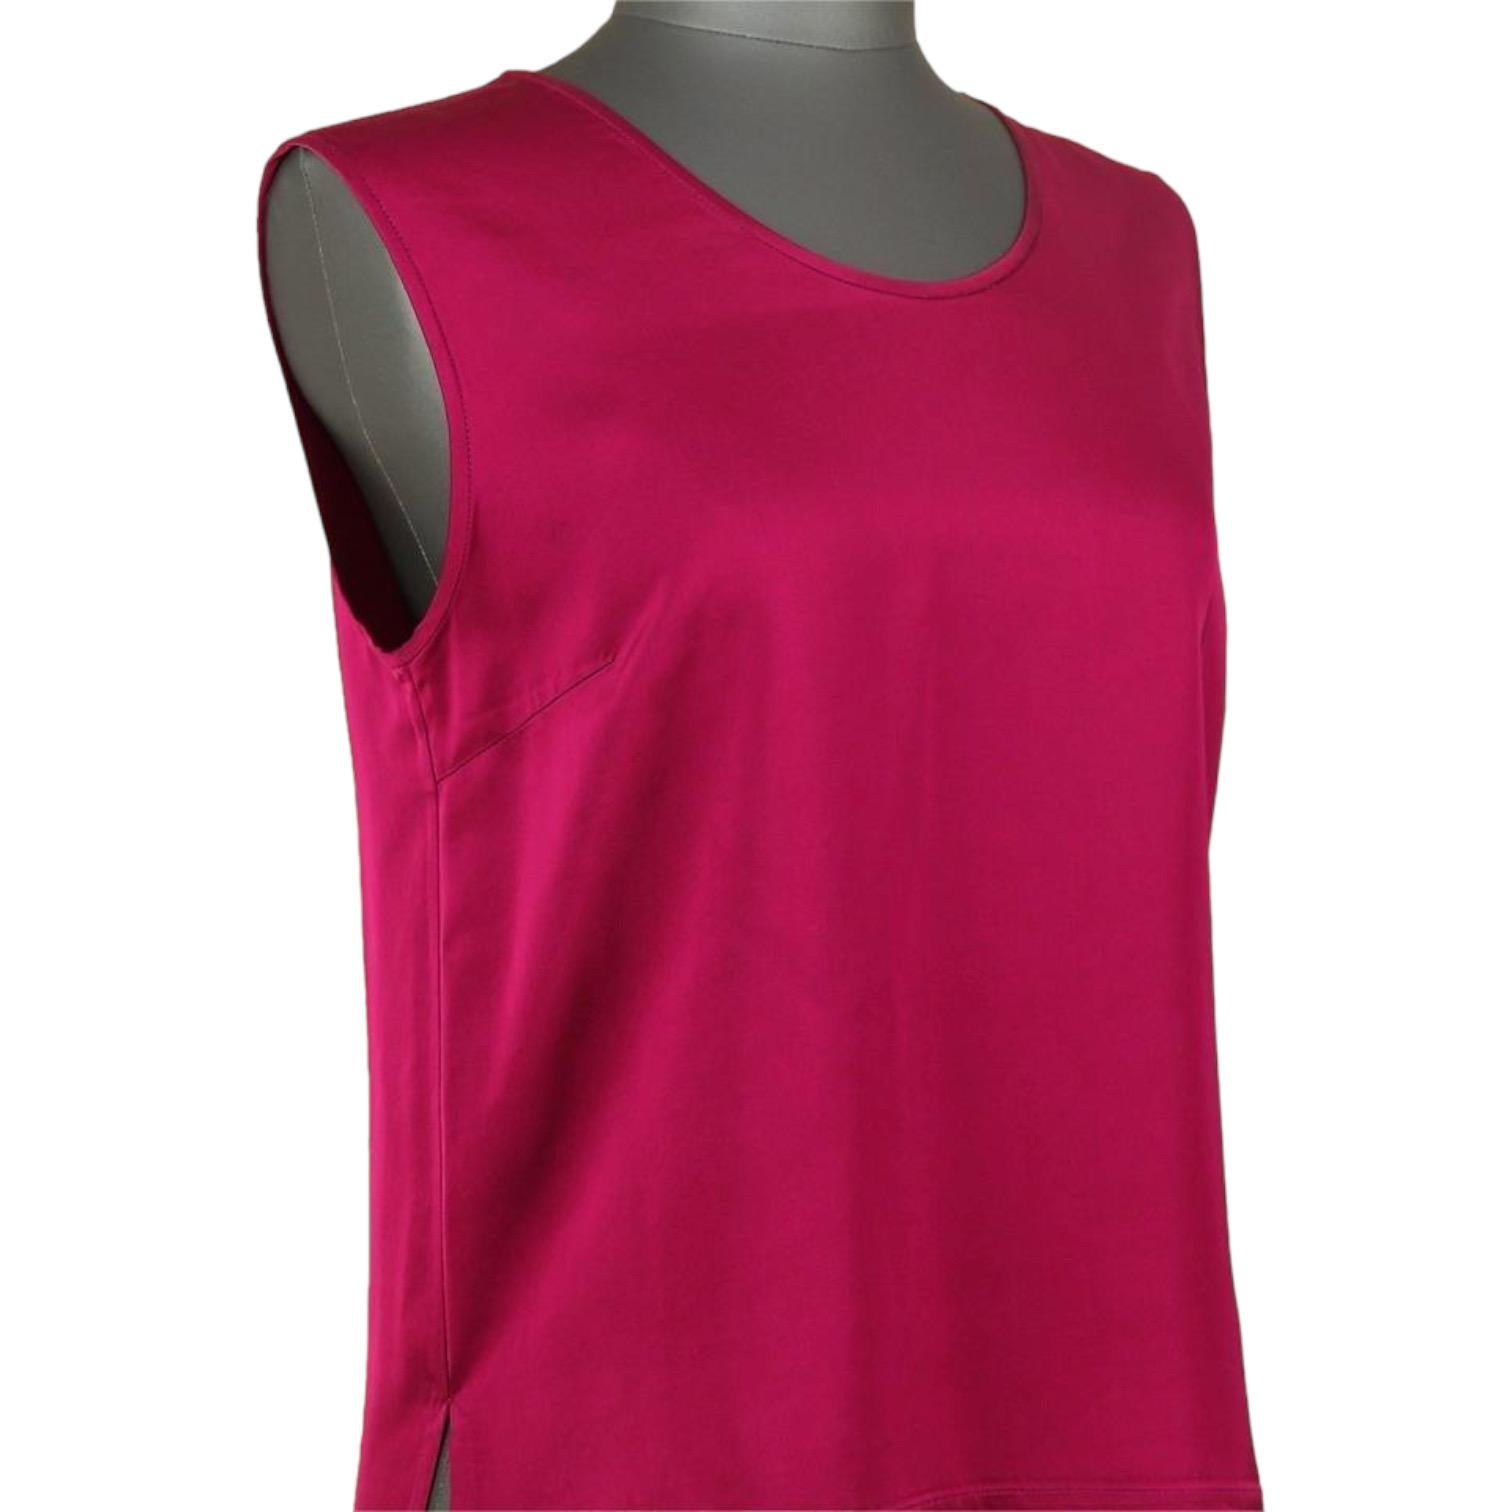 GUARANTEED AUTHENTIC STELLA MCCARTNEY CRANBERRY RED VISCOSE TUNIC TOP


Design:
* Round neck sleeveless top in a rich cranberry red color.
* Slip on.
* Beautiful longer length in the back.
* Unique and striking top.

Size: 38

Material: